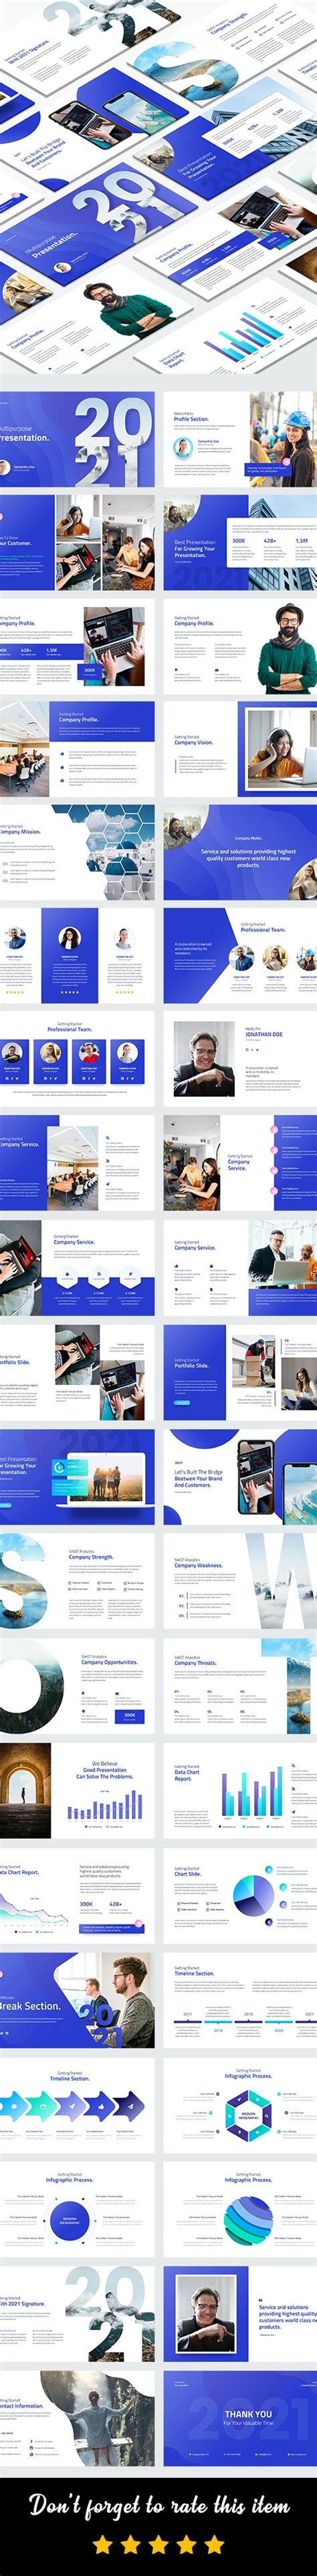 2021 Creative Multipurpose Powerpoint Template By Bayuapriansyahk